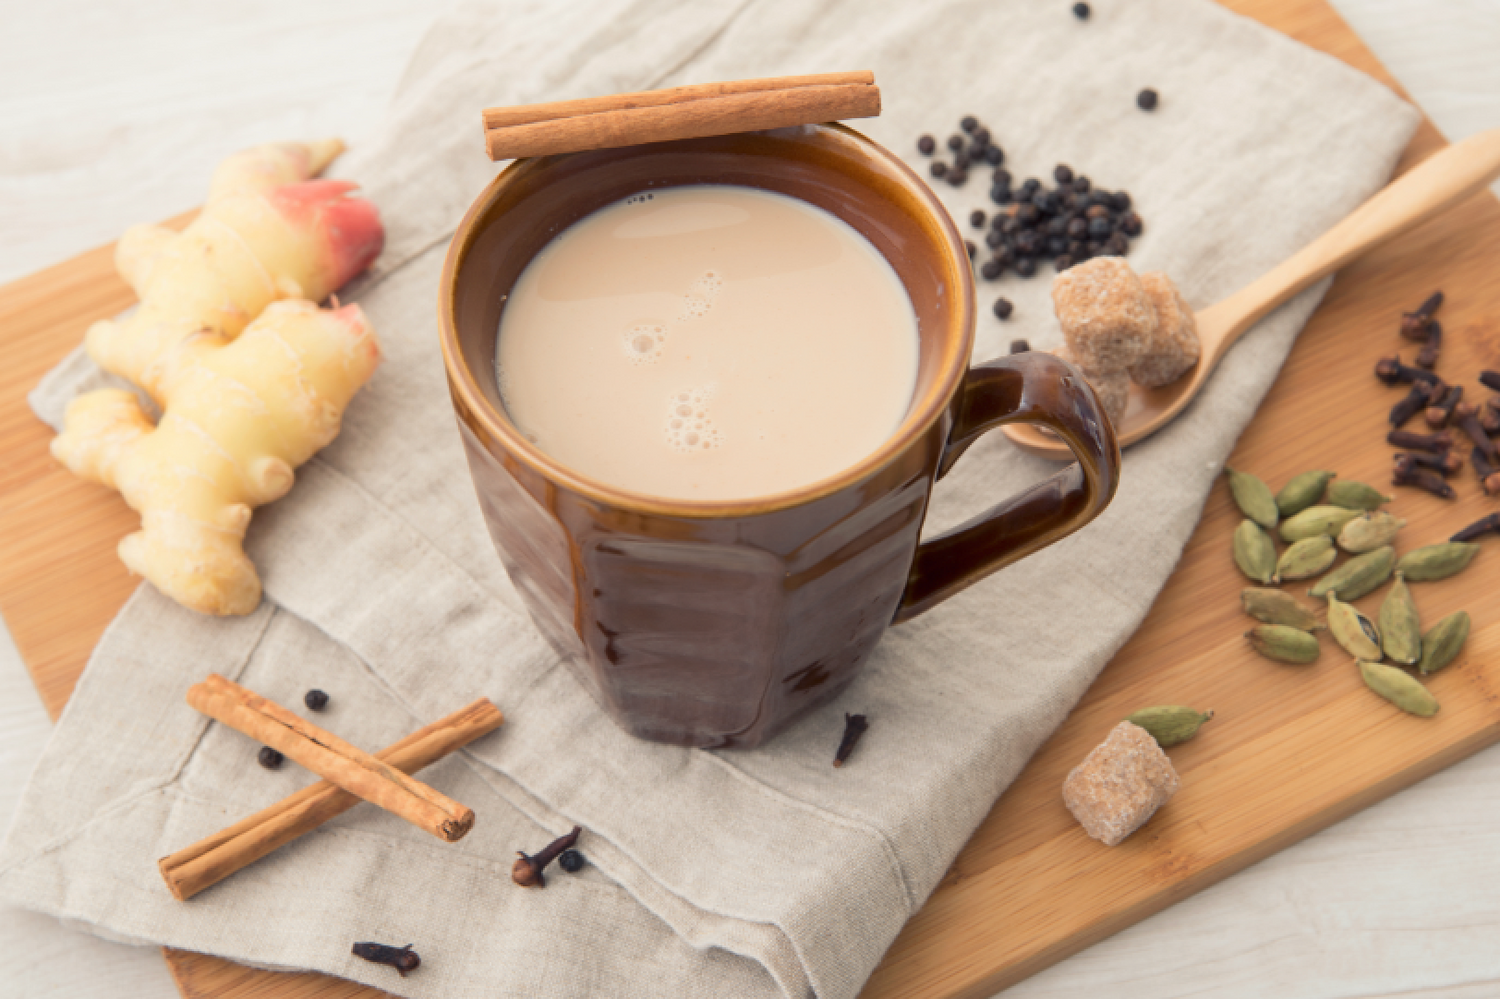 The Spice of Life: How to make the perfect Masala Chai tea